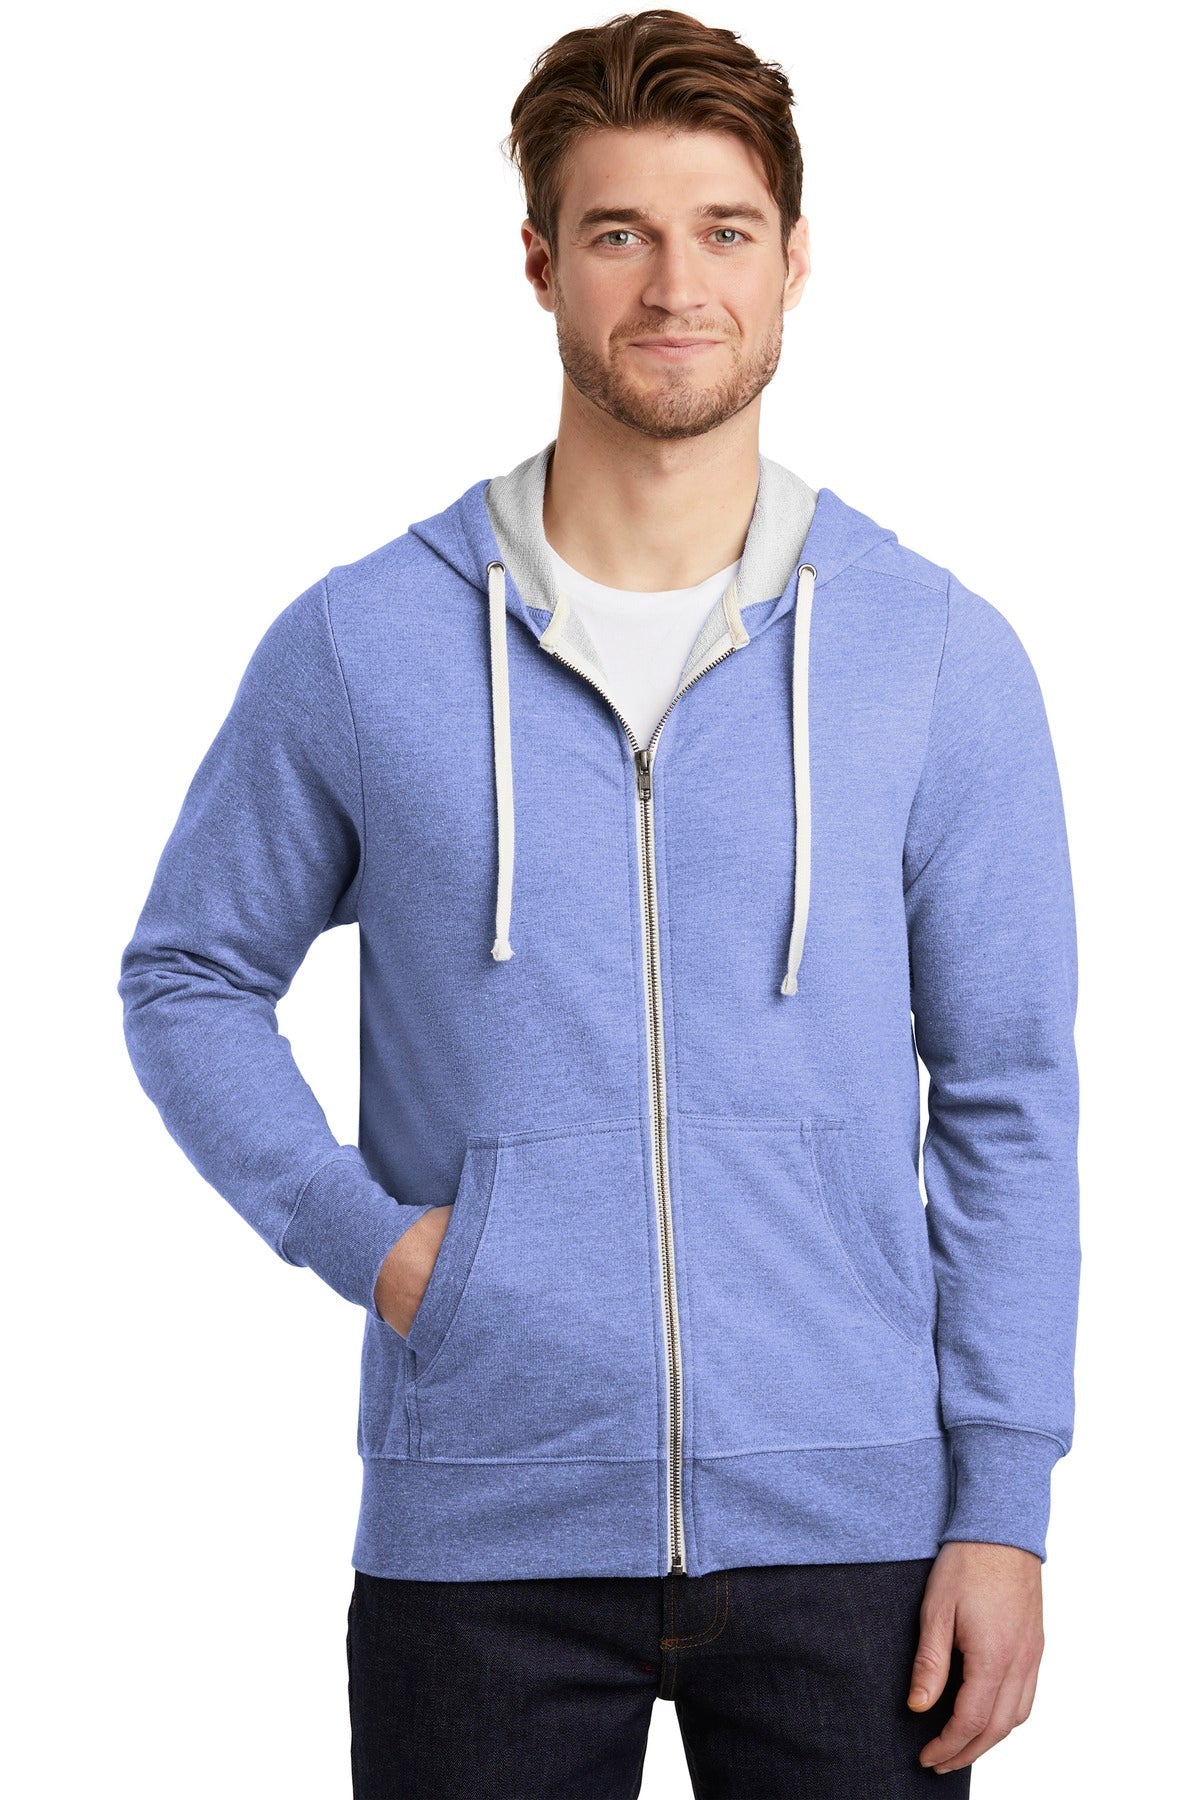 District ® Perfect Tri ® French Terry Full-Zip Hoodie. DT356 - DFW Impression